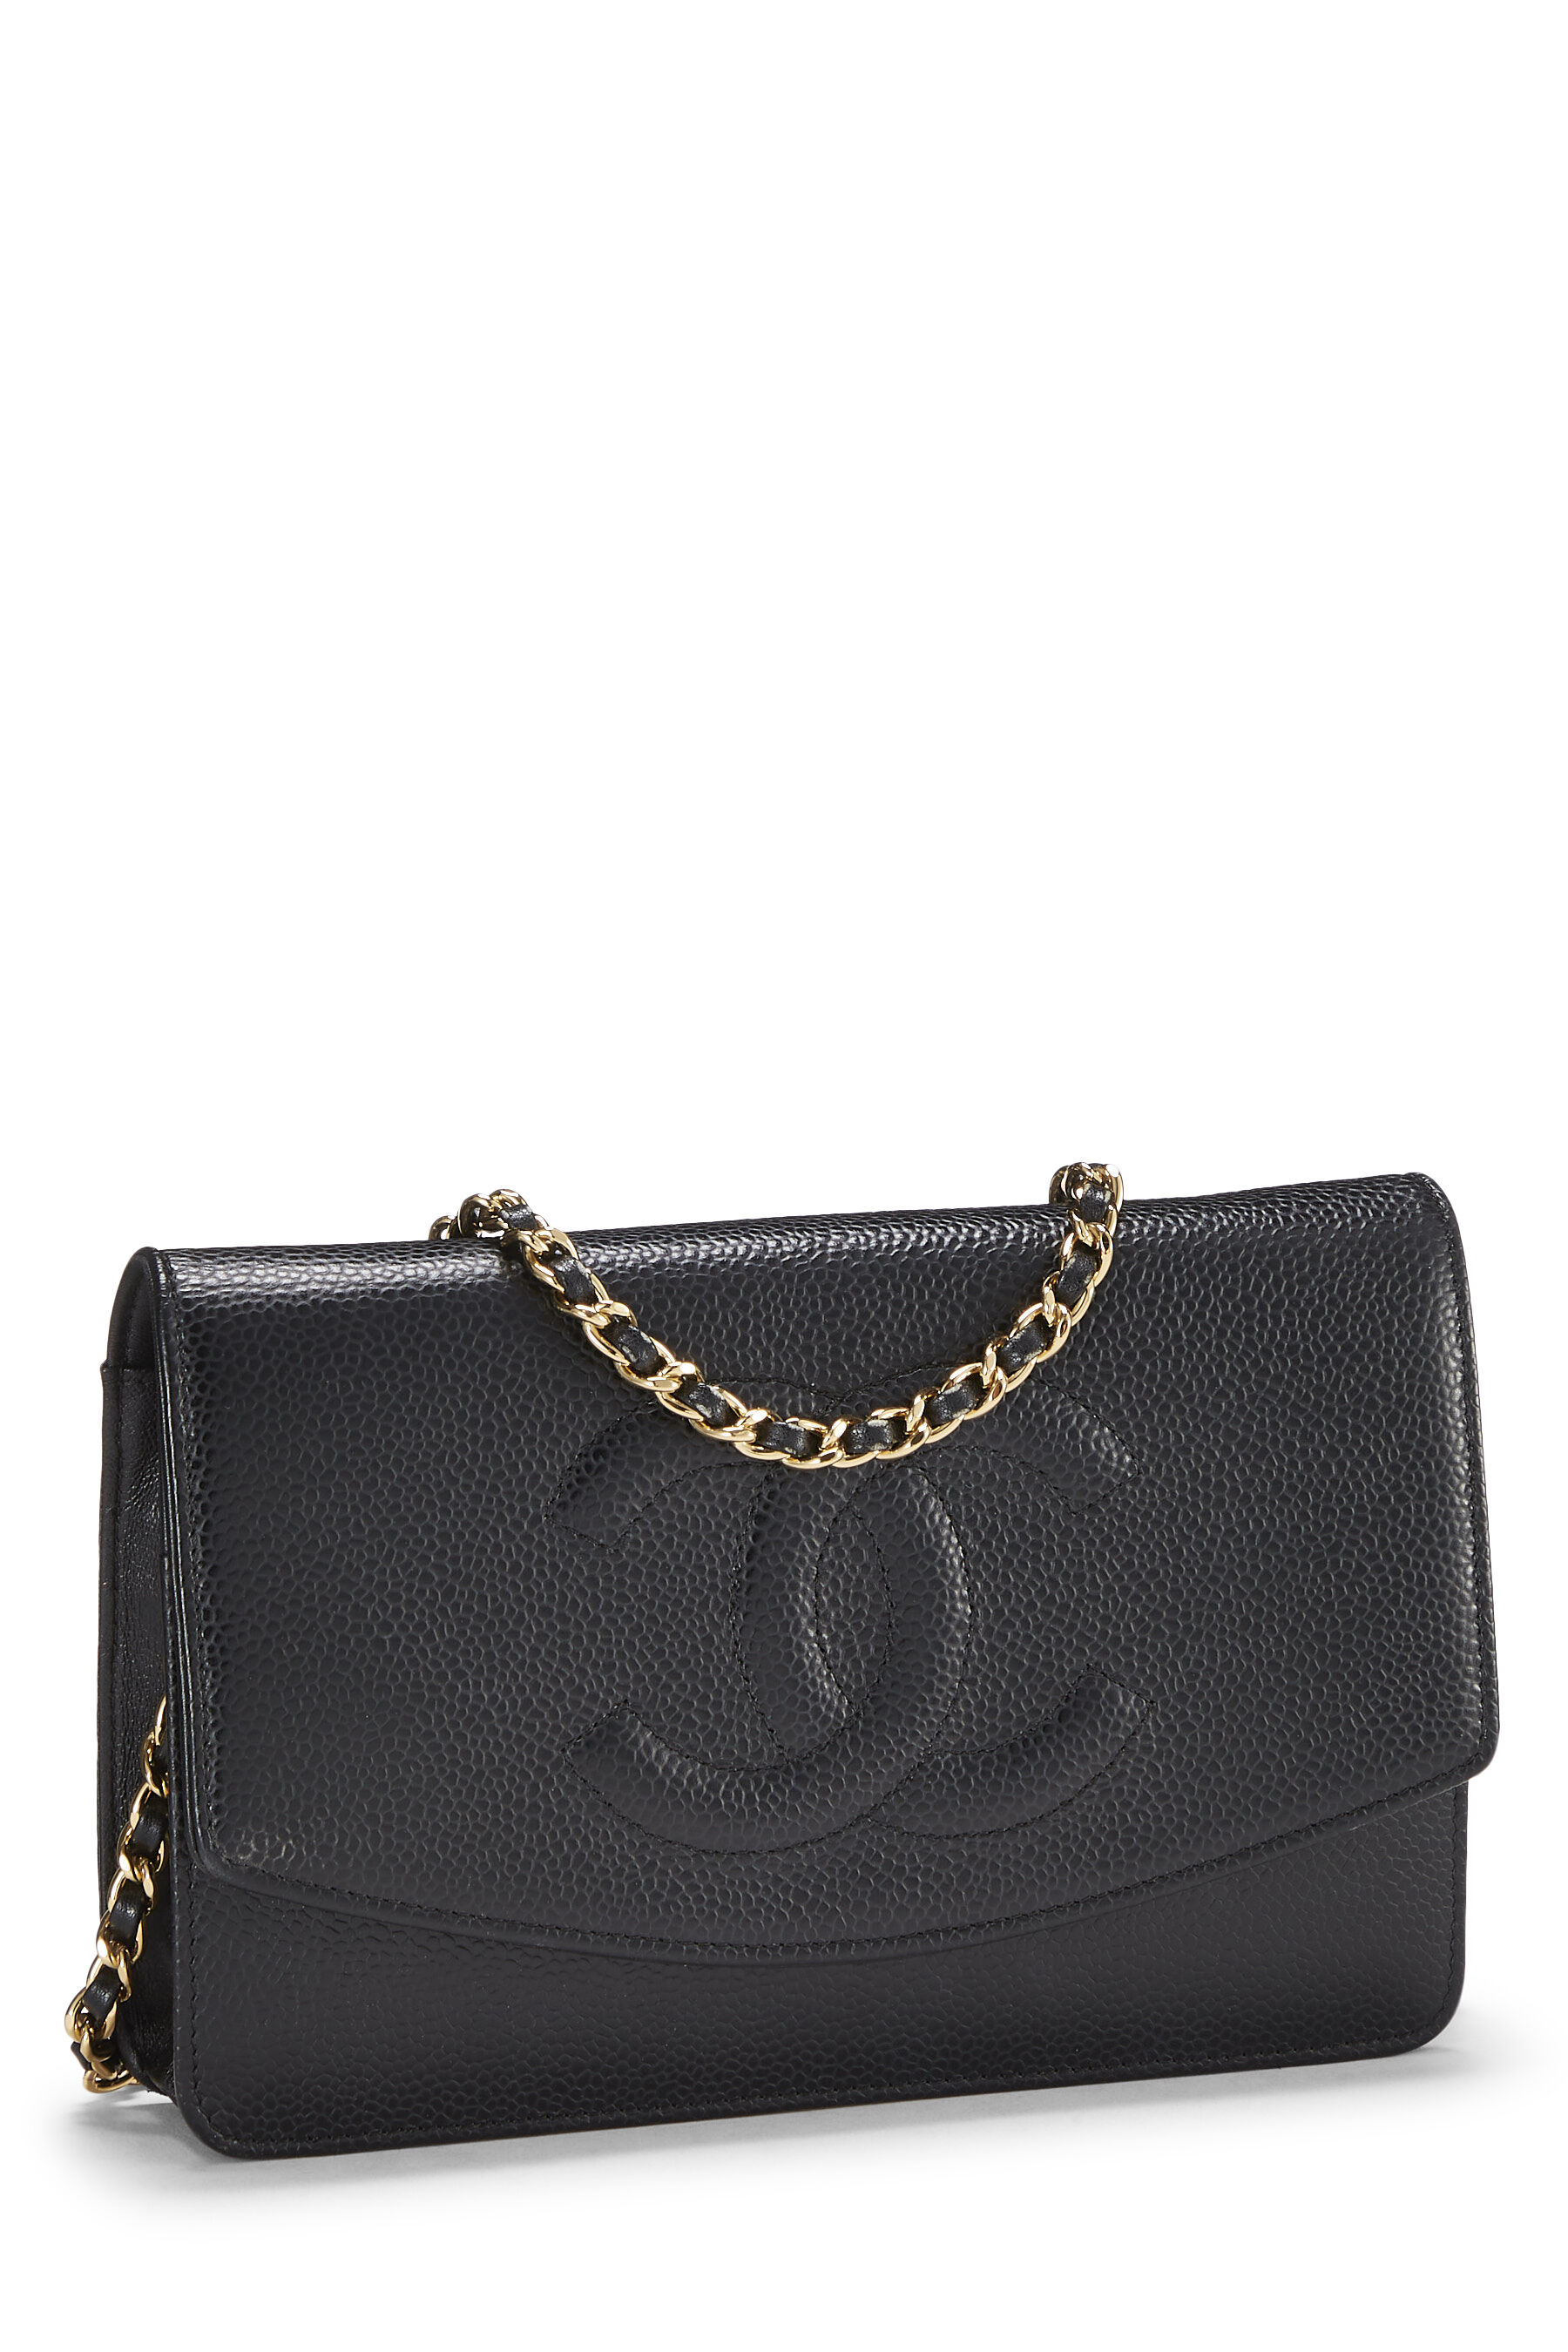 Chanel Black Caviar Timeless Wallet on Chain (WOC